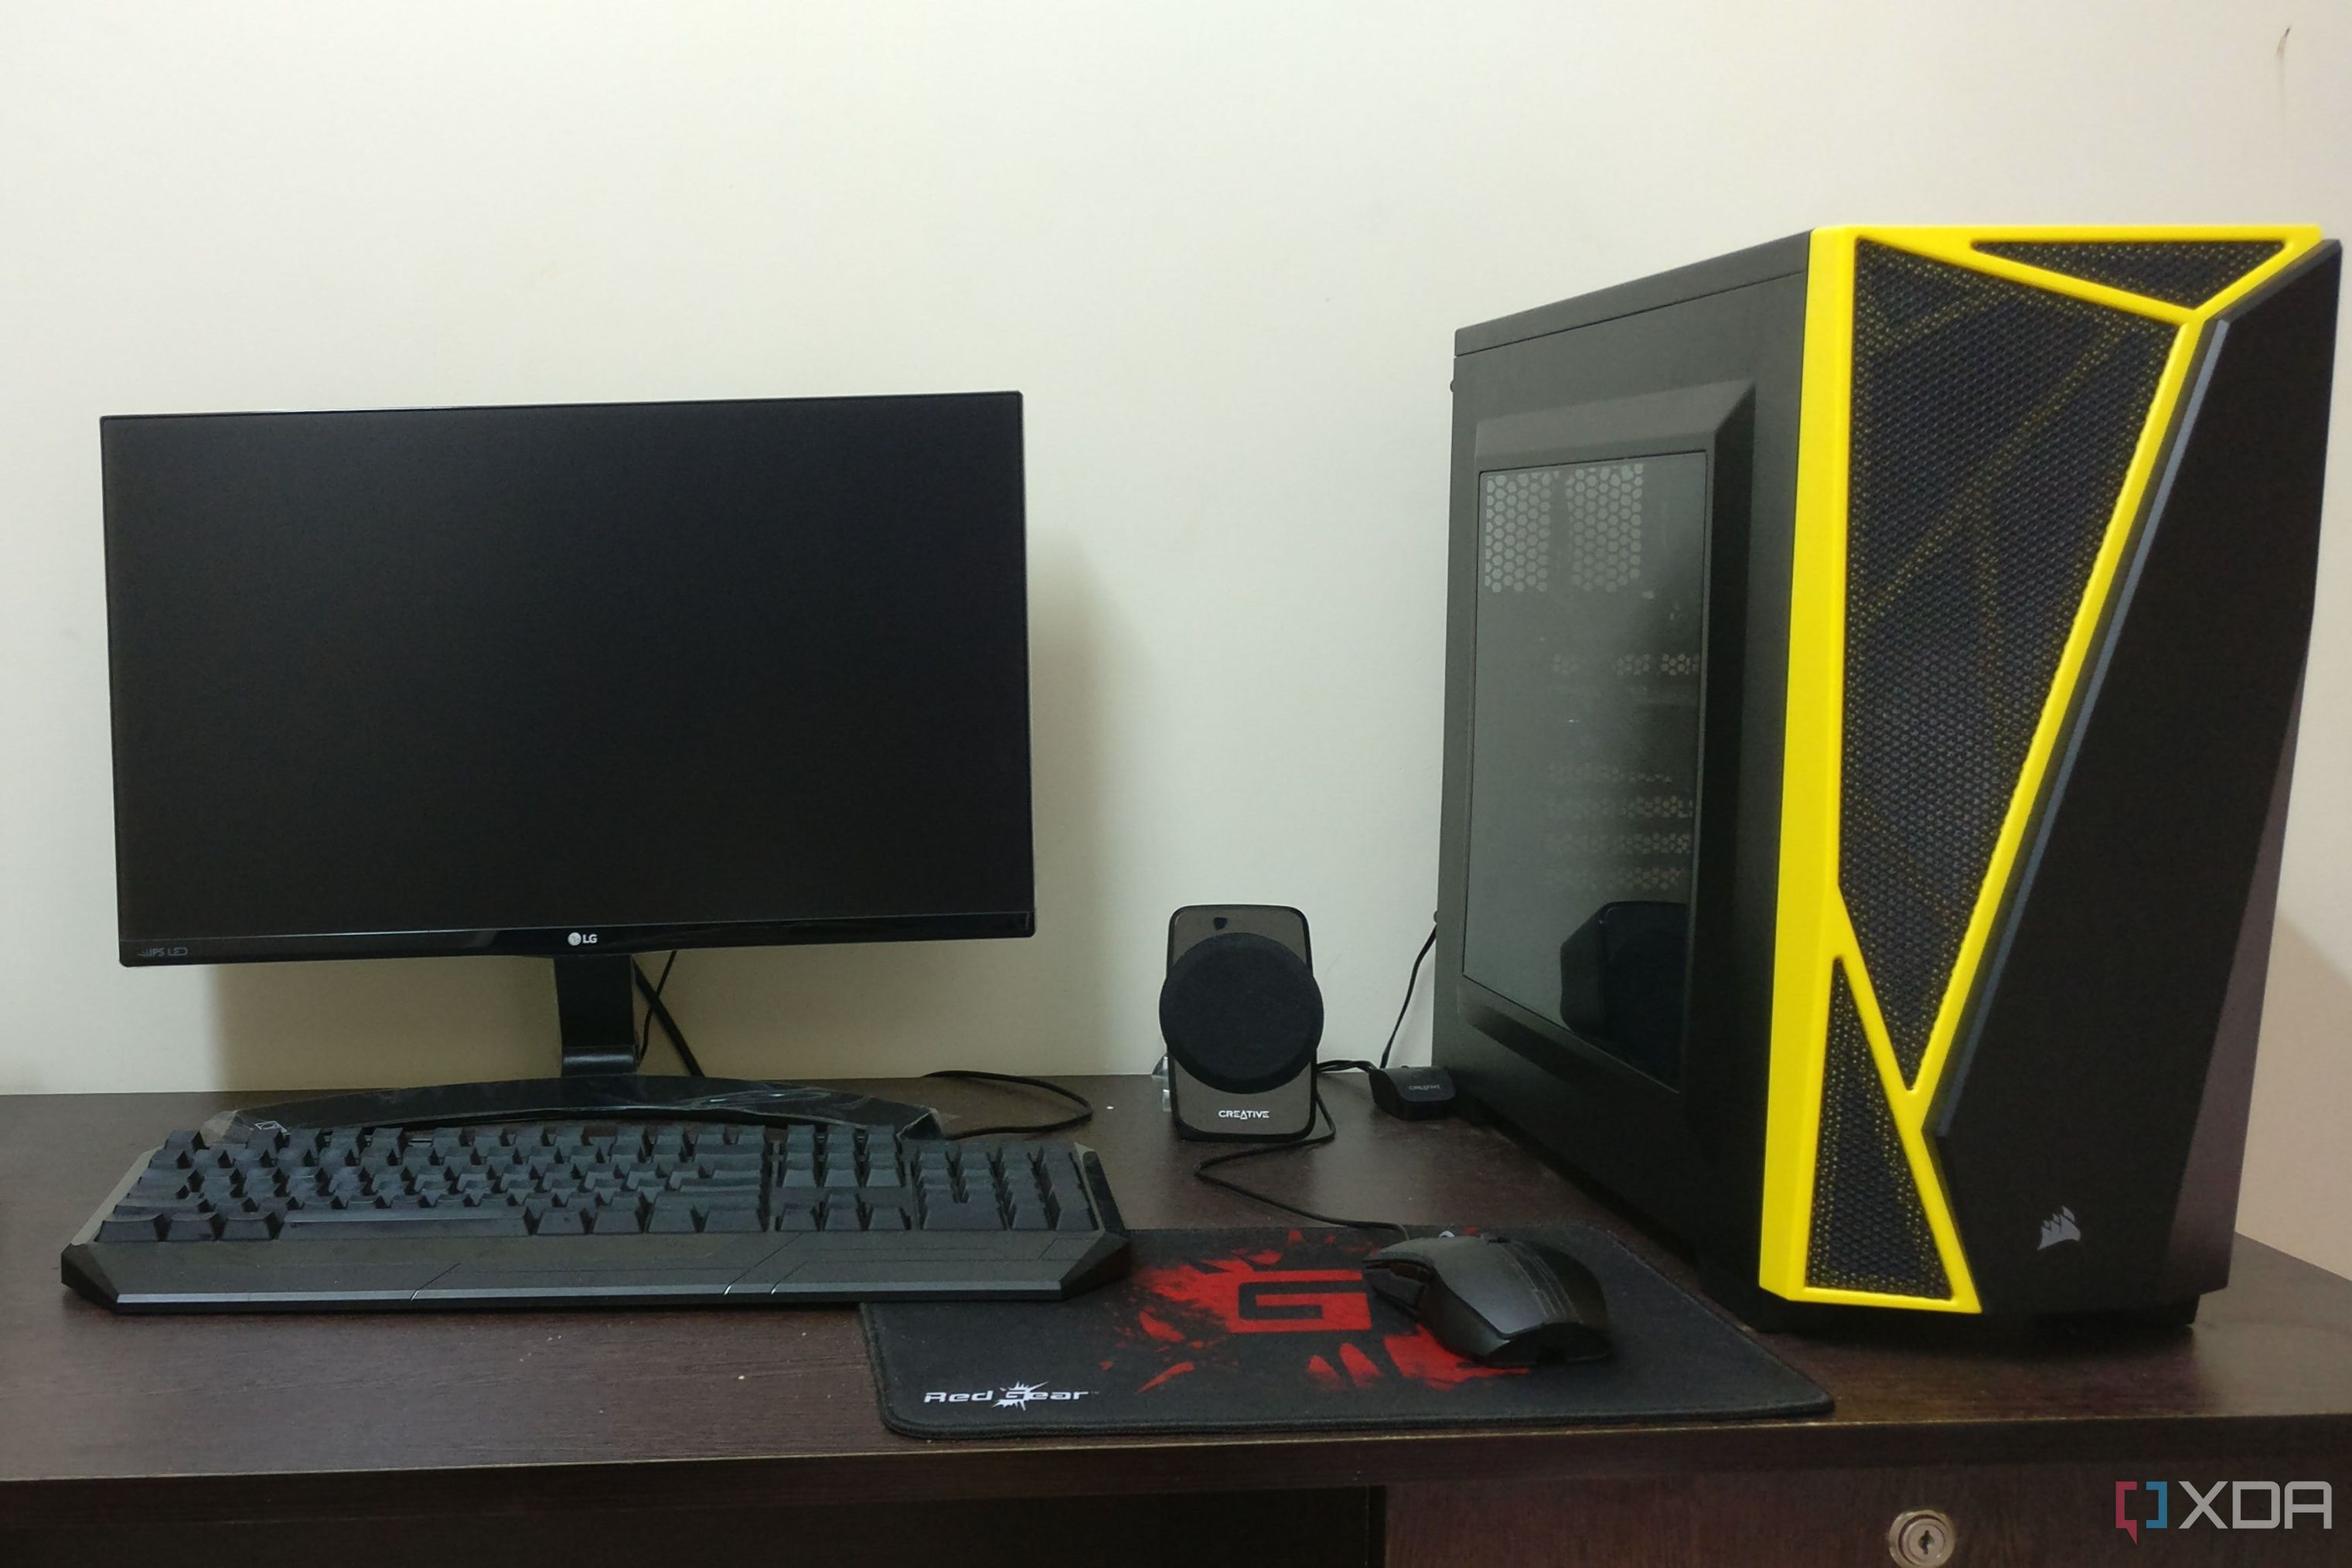 Black Gaming PC setup with monitor and keyboard mouse